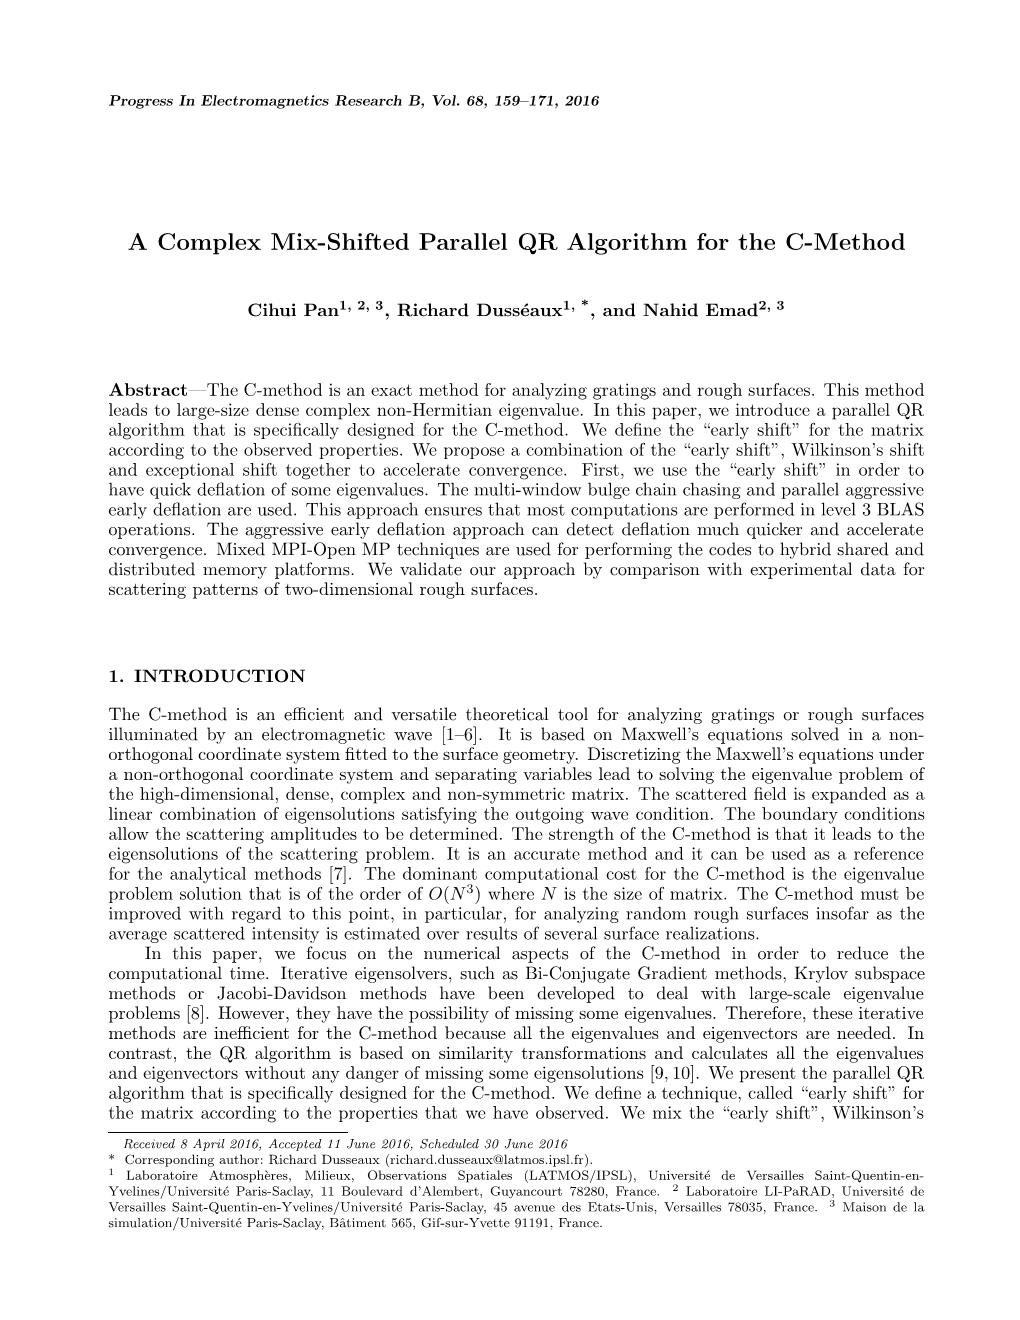 A Complex Mix-Shifted Parallel QR Algorithm for the C-Method